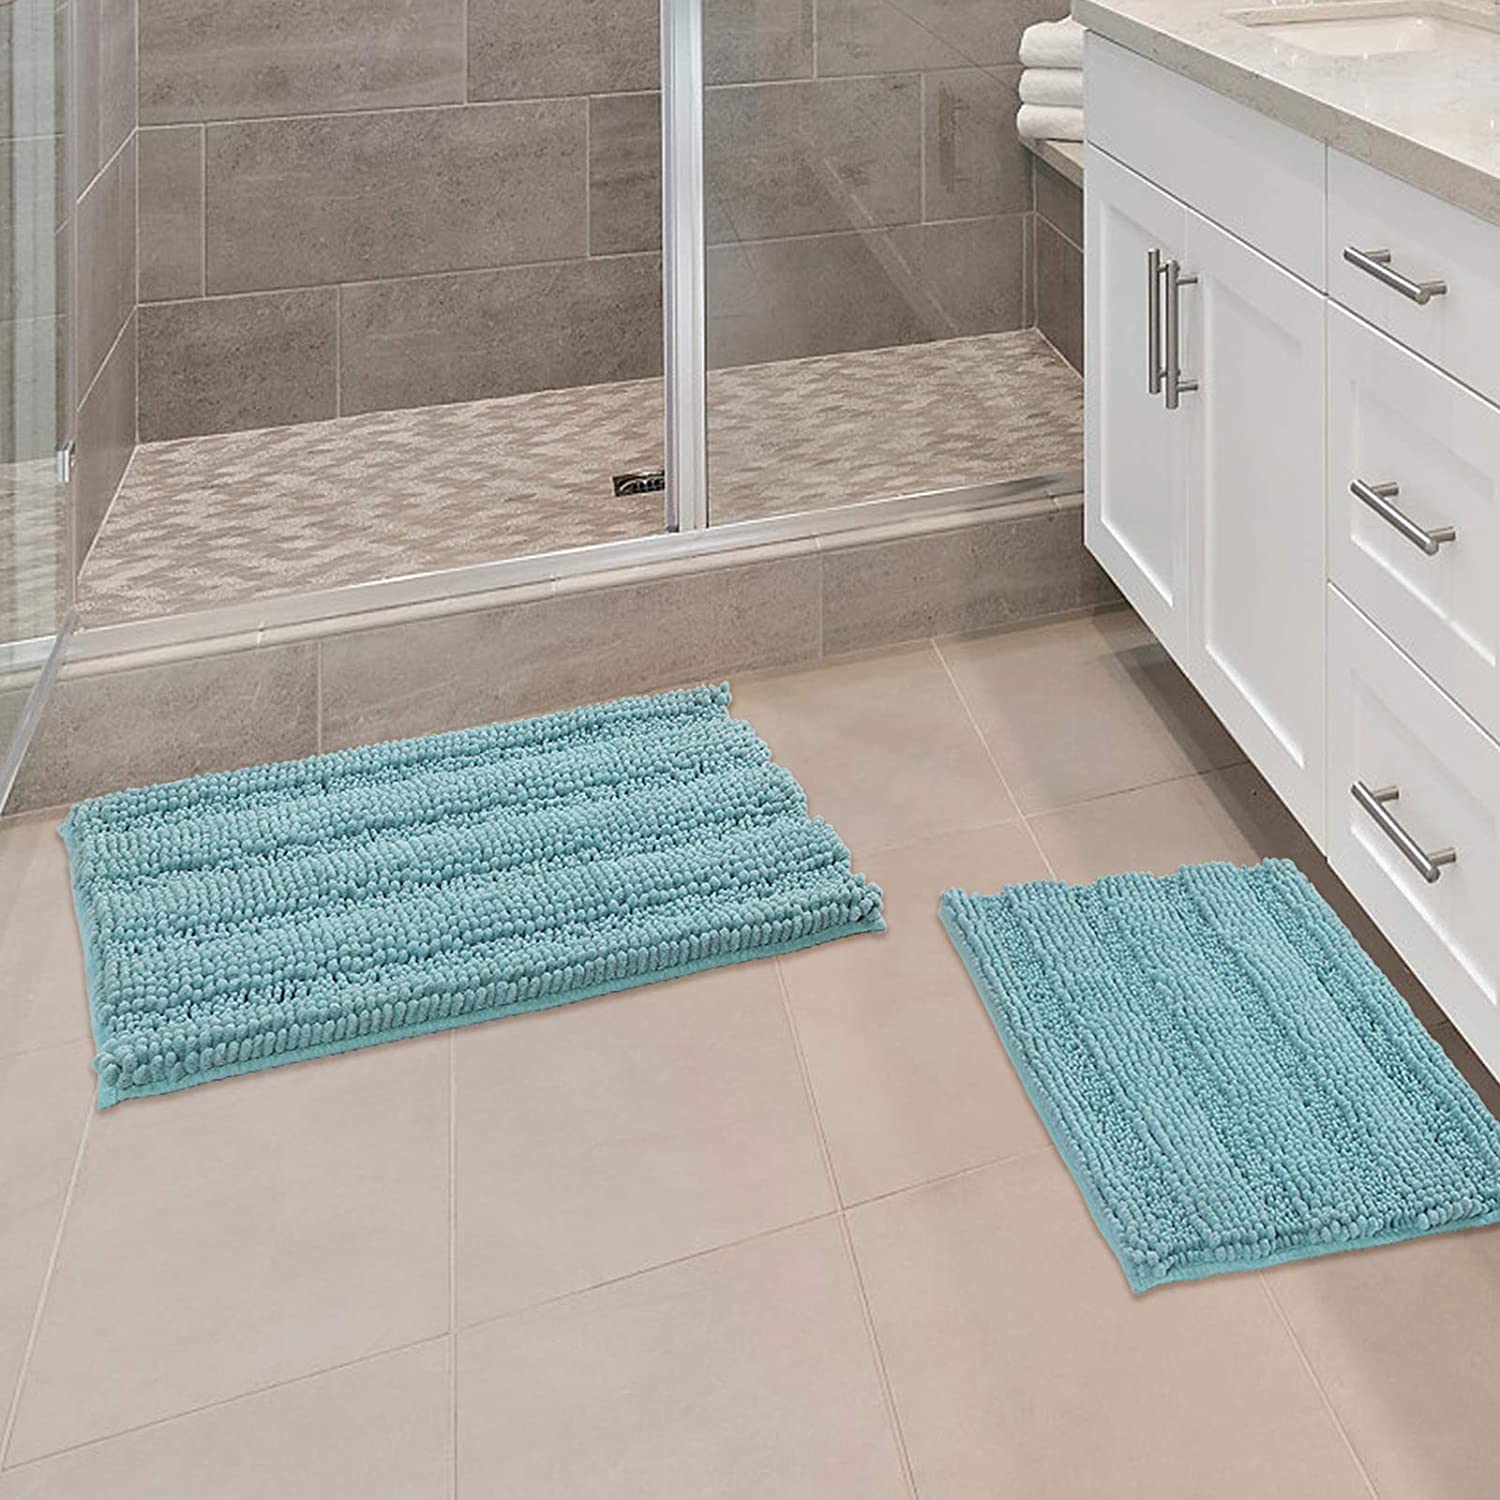 Details about   Bath Mats for Bathroom Non Slip Ultra Thick and Soft Chenille Plush Striped Floo 